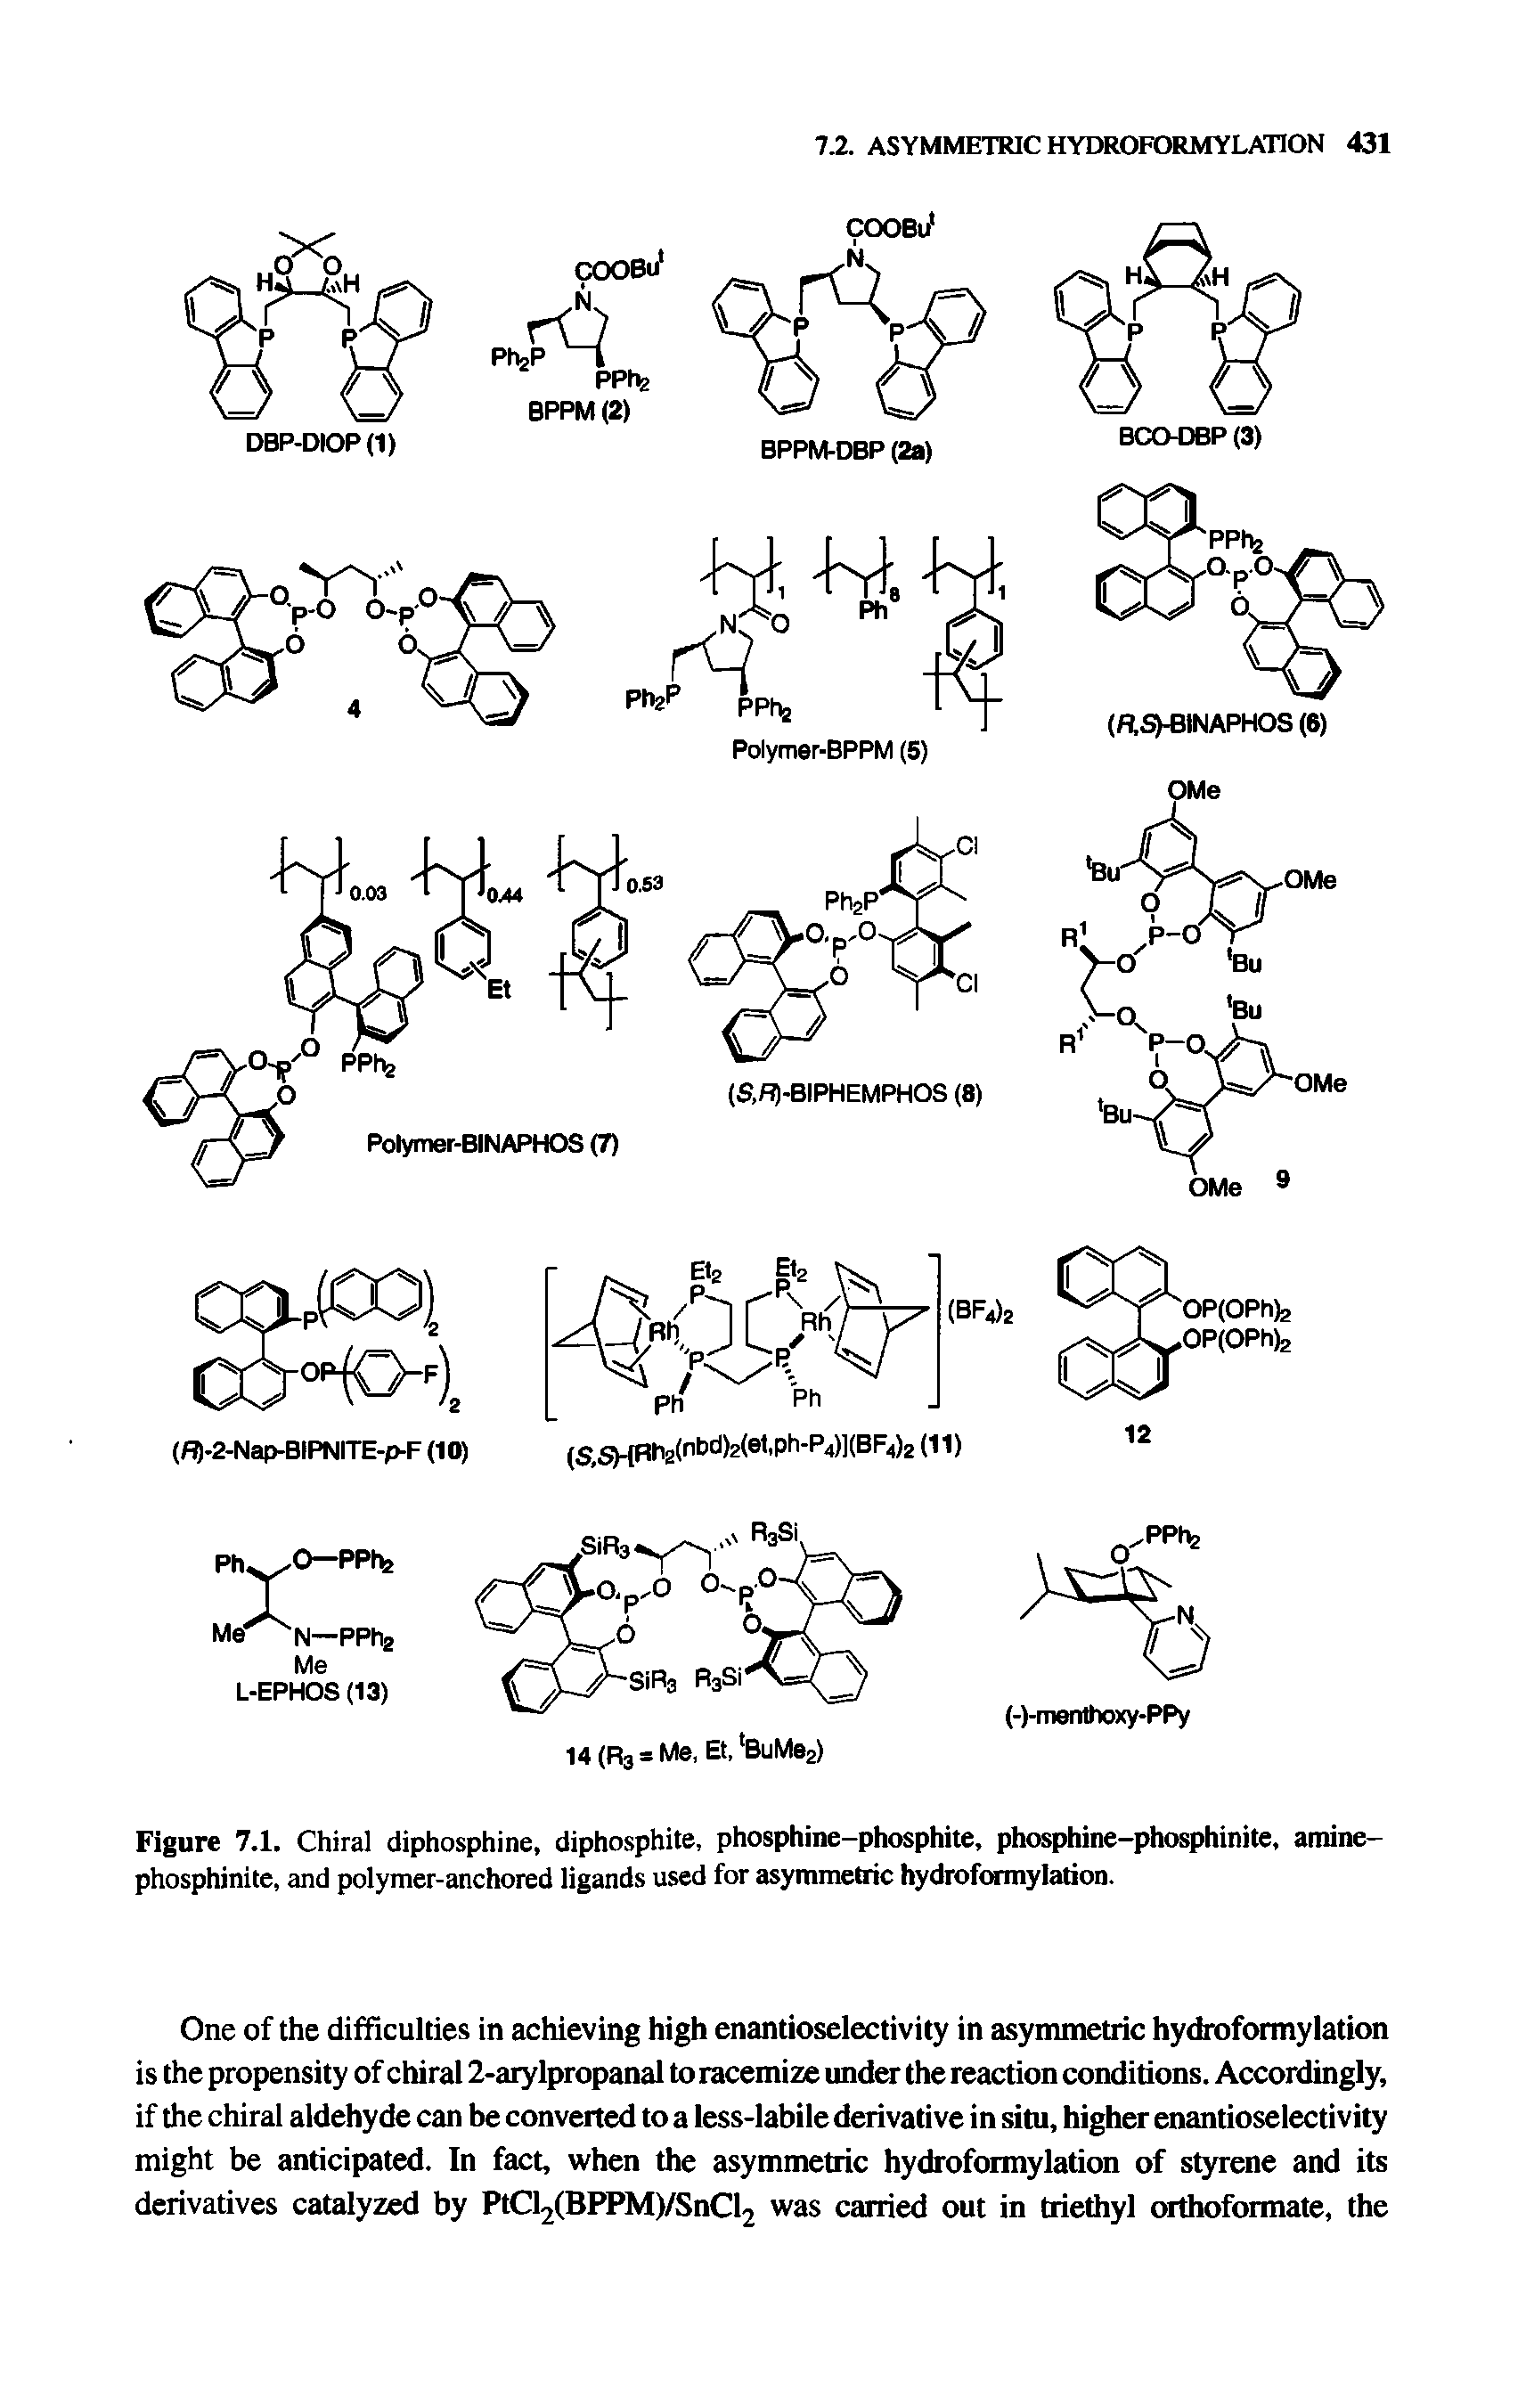 Figure 7.1. Chiral diphosphine, diphosphite, phosphine-phosphite, phosphine-phosphinite, amine-phosphinite, and polymer-anchored ligands used for asymmetric hydroformyiatioD.